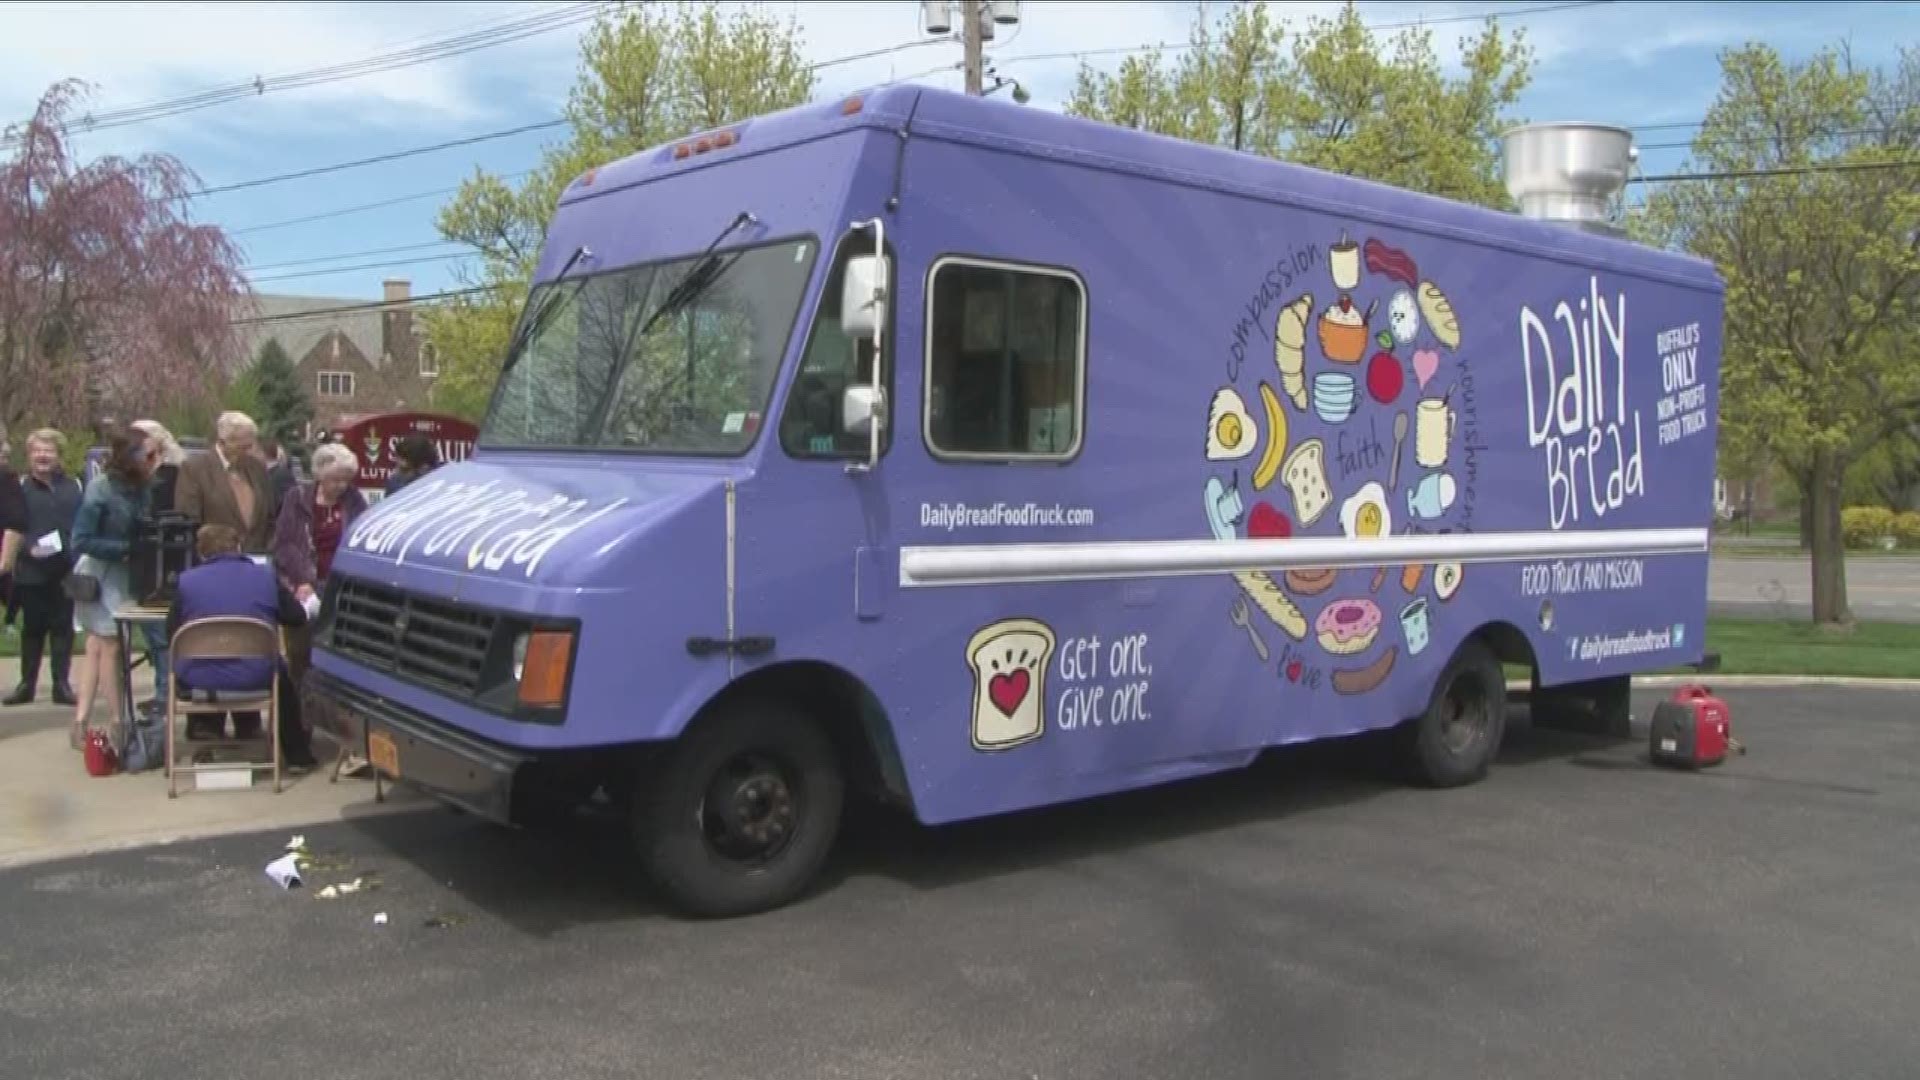 An engine fire damaged the first Daily Bread food truck last September, but now the mission is moving forward with a new vehicle.